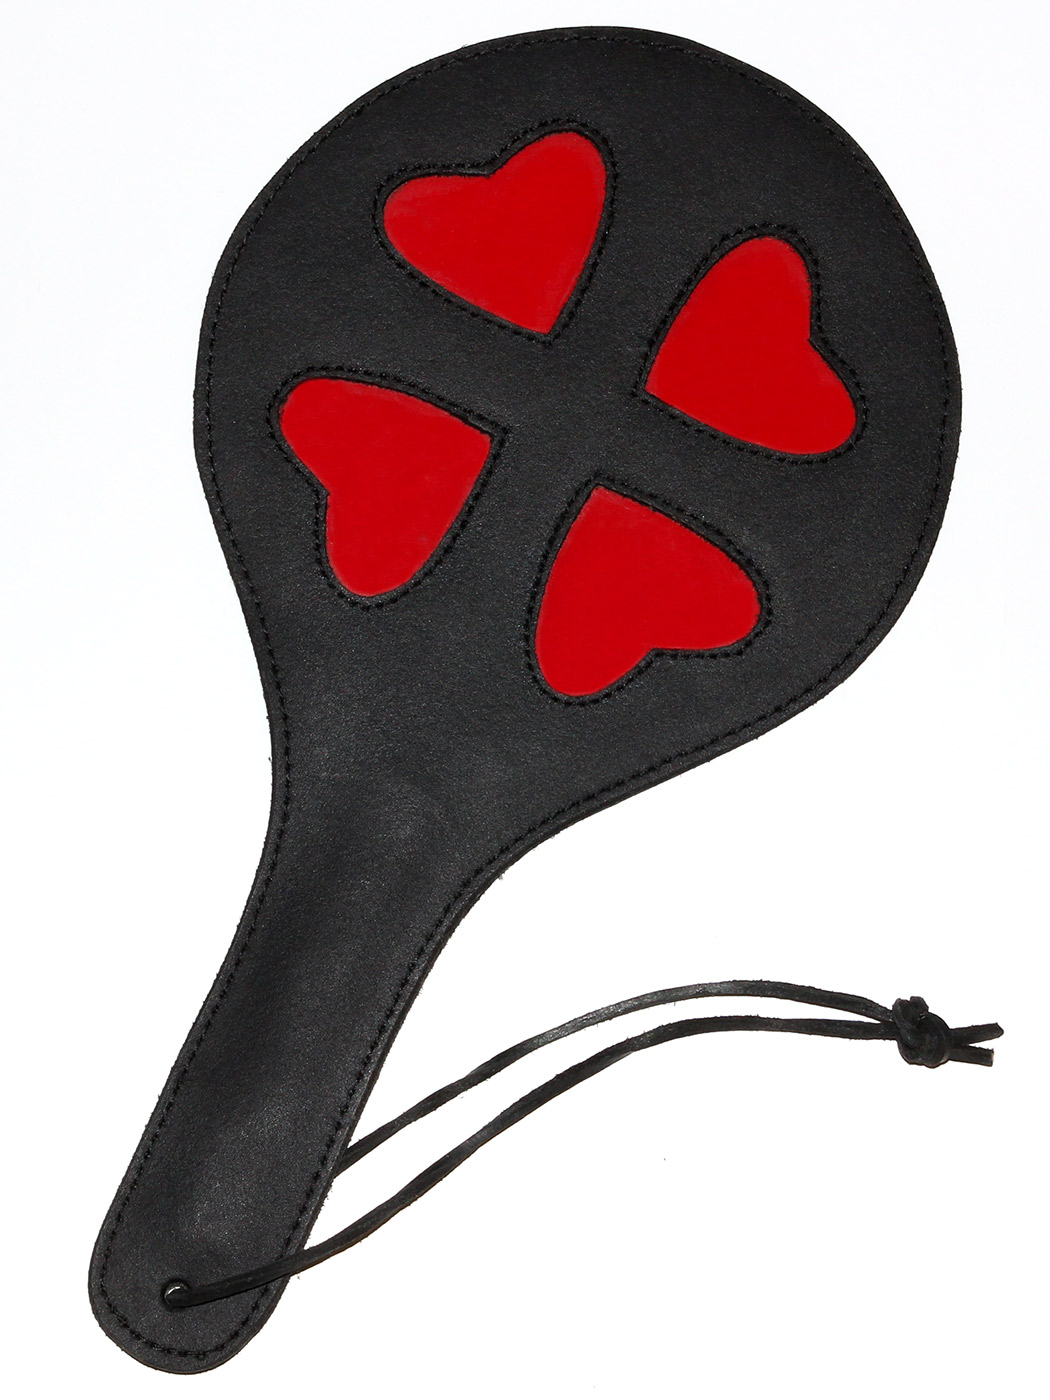 Four Hearts Paddle